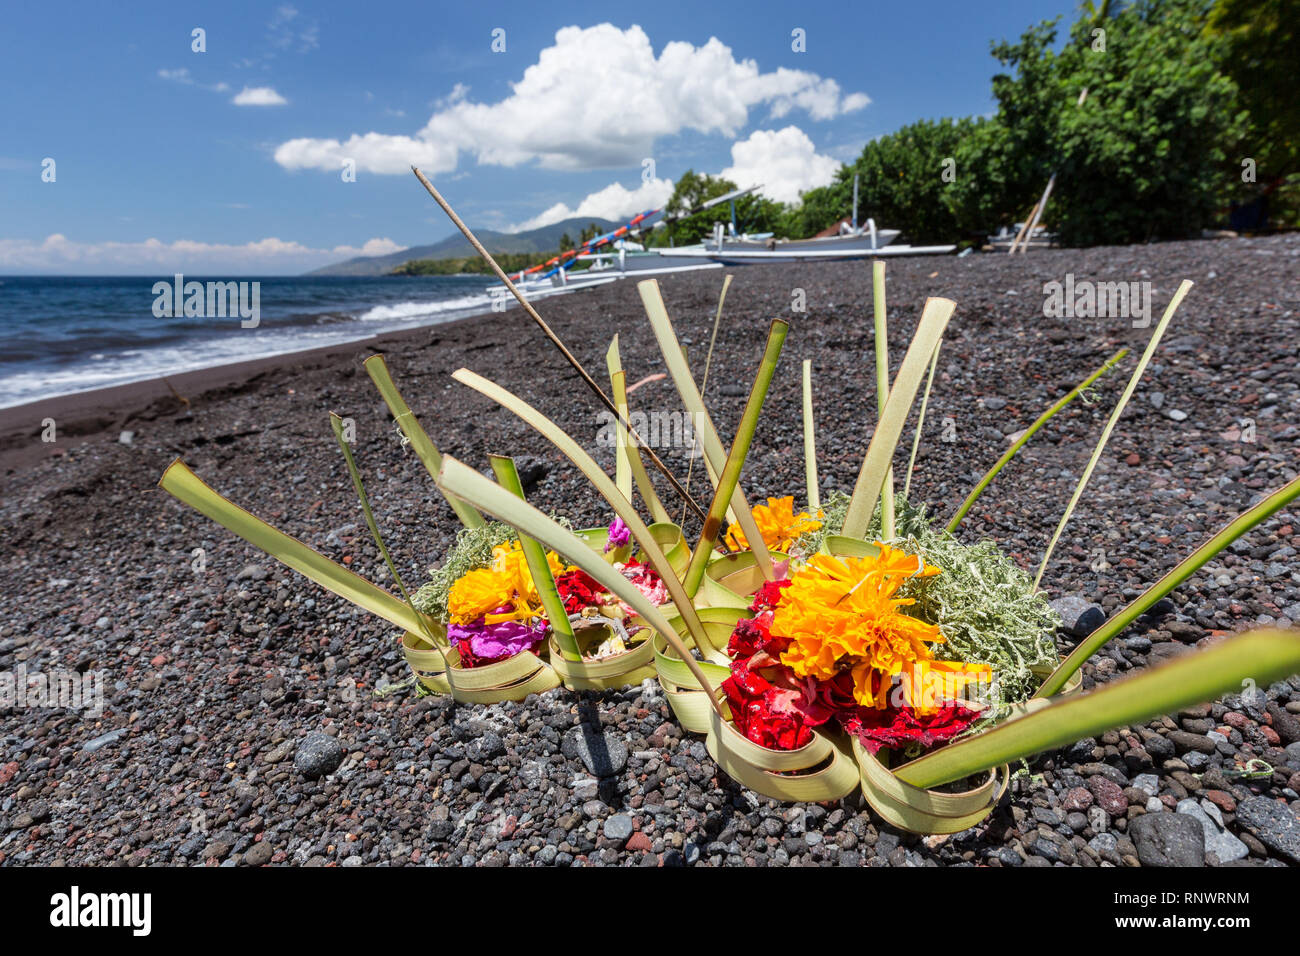 Offerings laid out on the beach is a common sight in Tulamben, Bali. Stock Photo